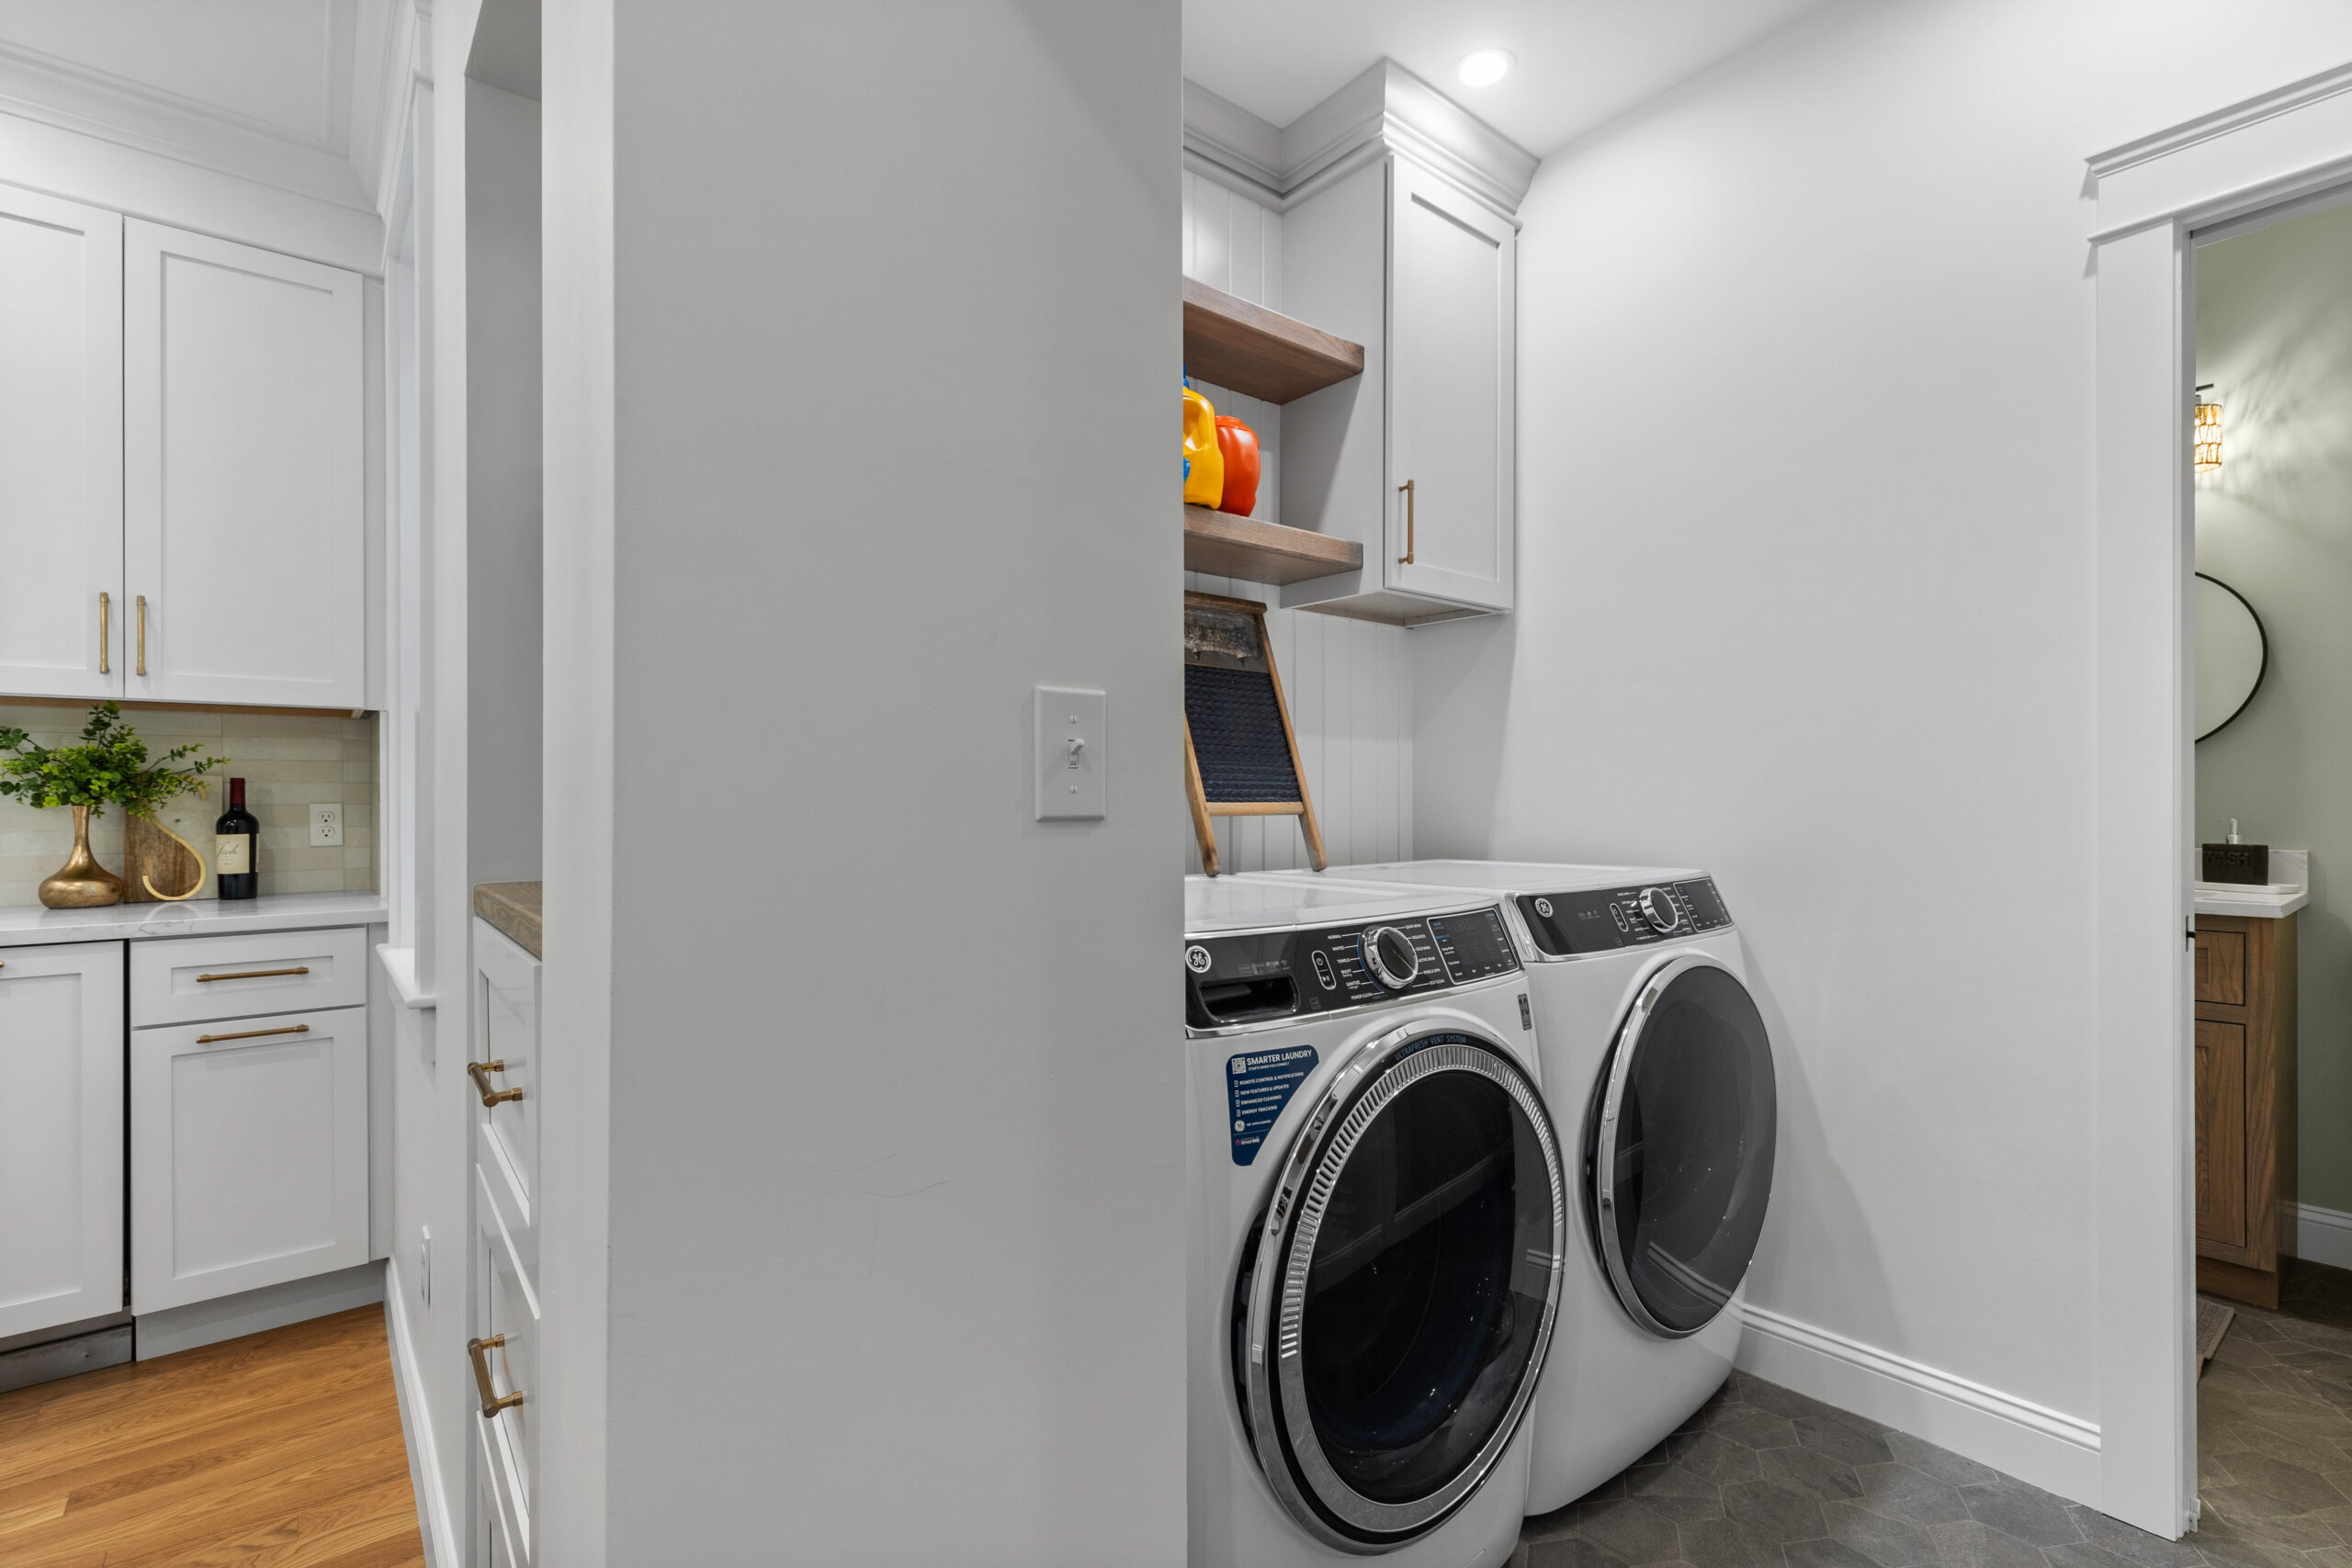 Renovated laundry room in a vintage New England home featuring modern washer and dryer, custom cabinetry, and a sleek, organized space.